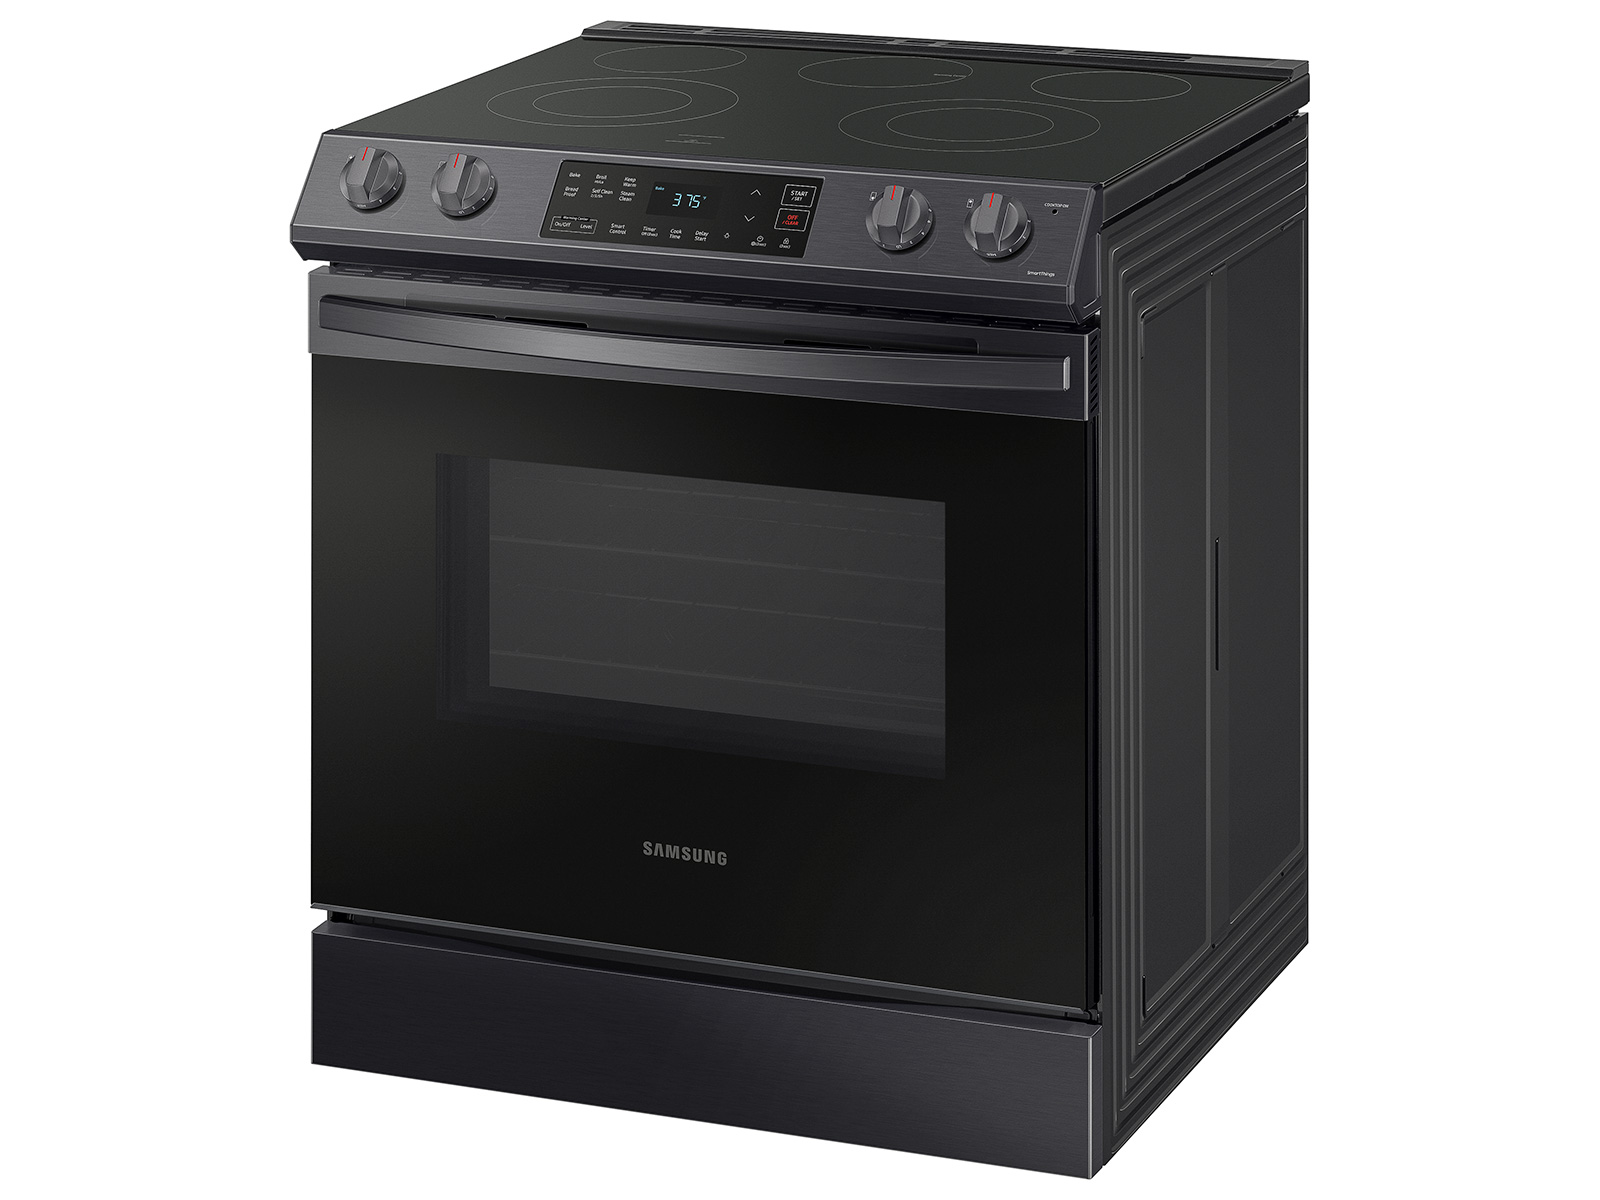 27 in. - Electric Ranges - Ranges - The Home Depot